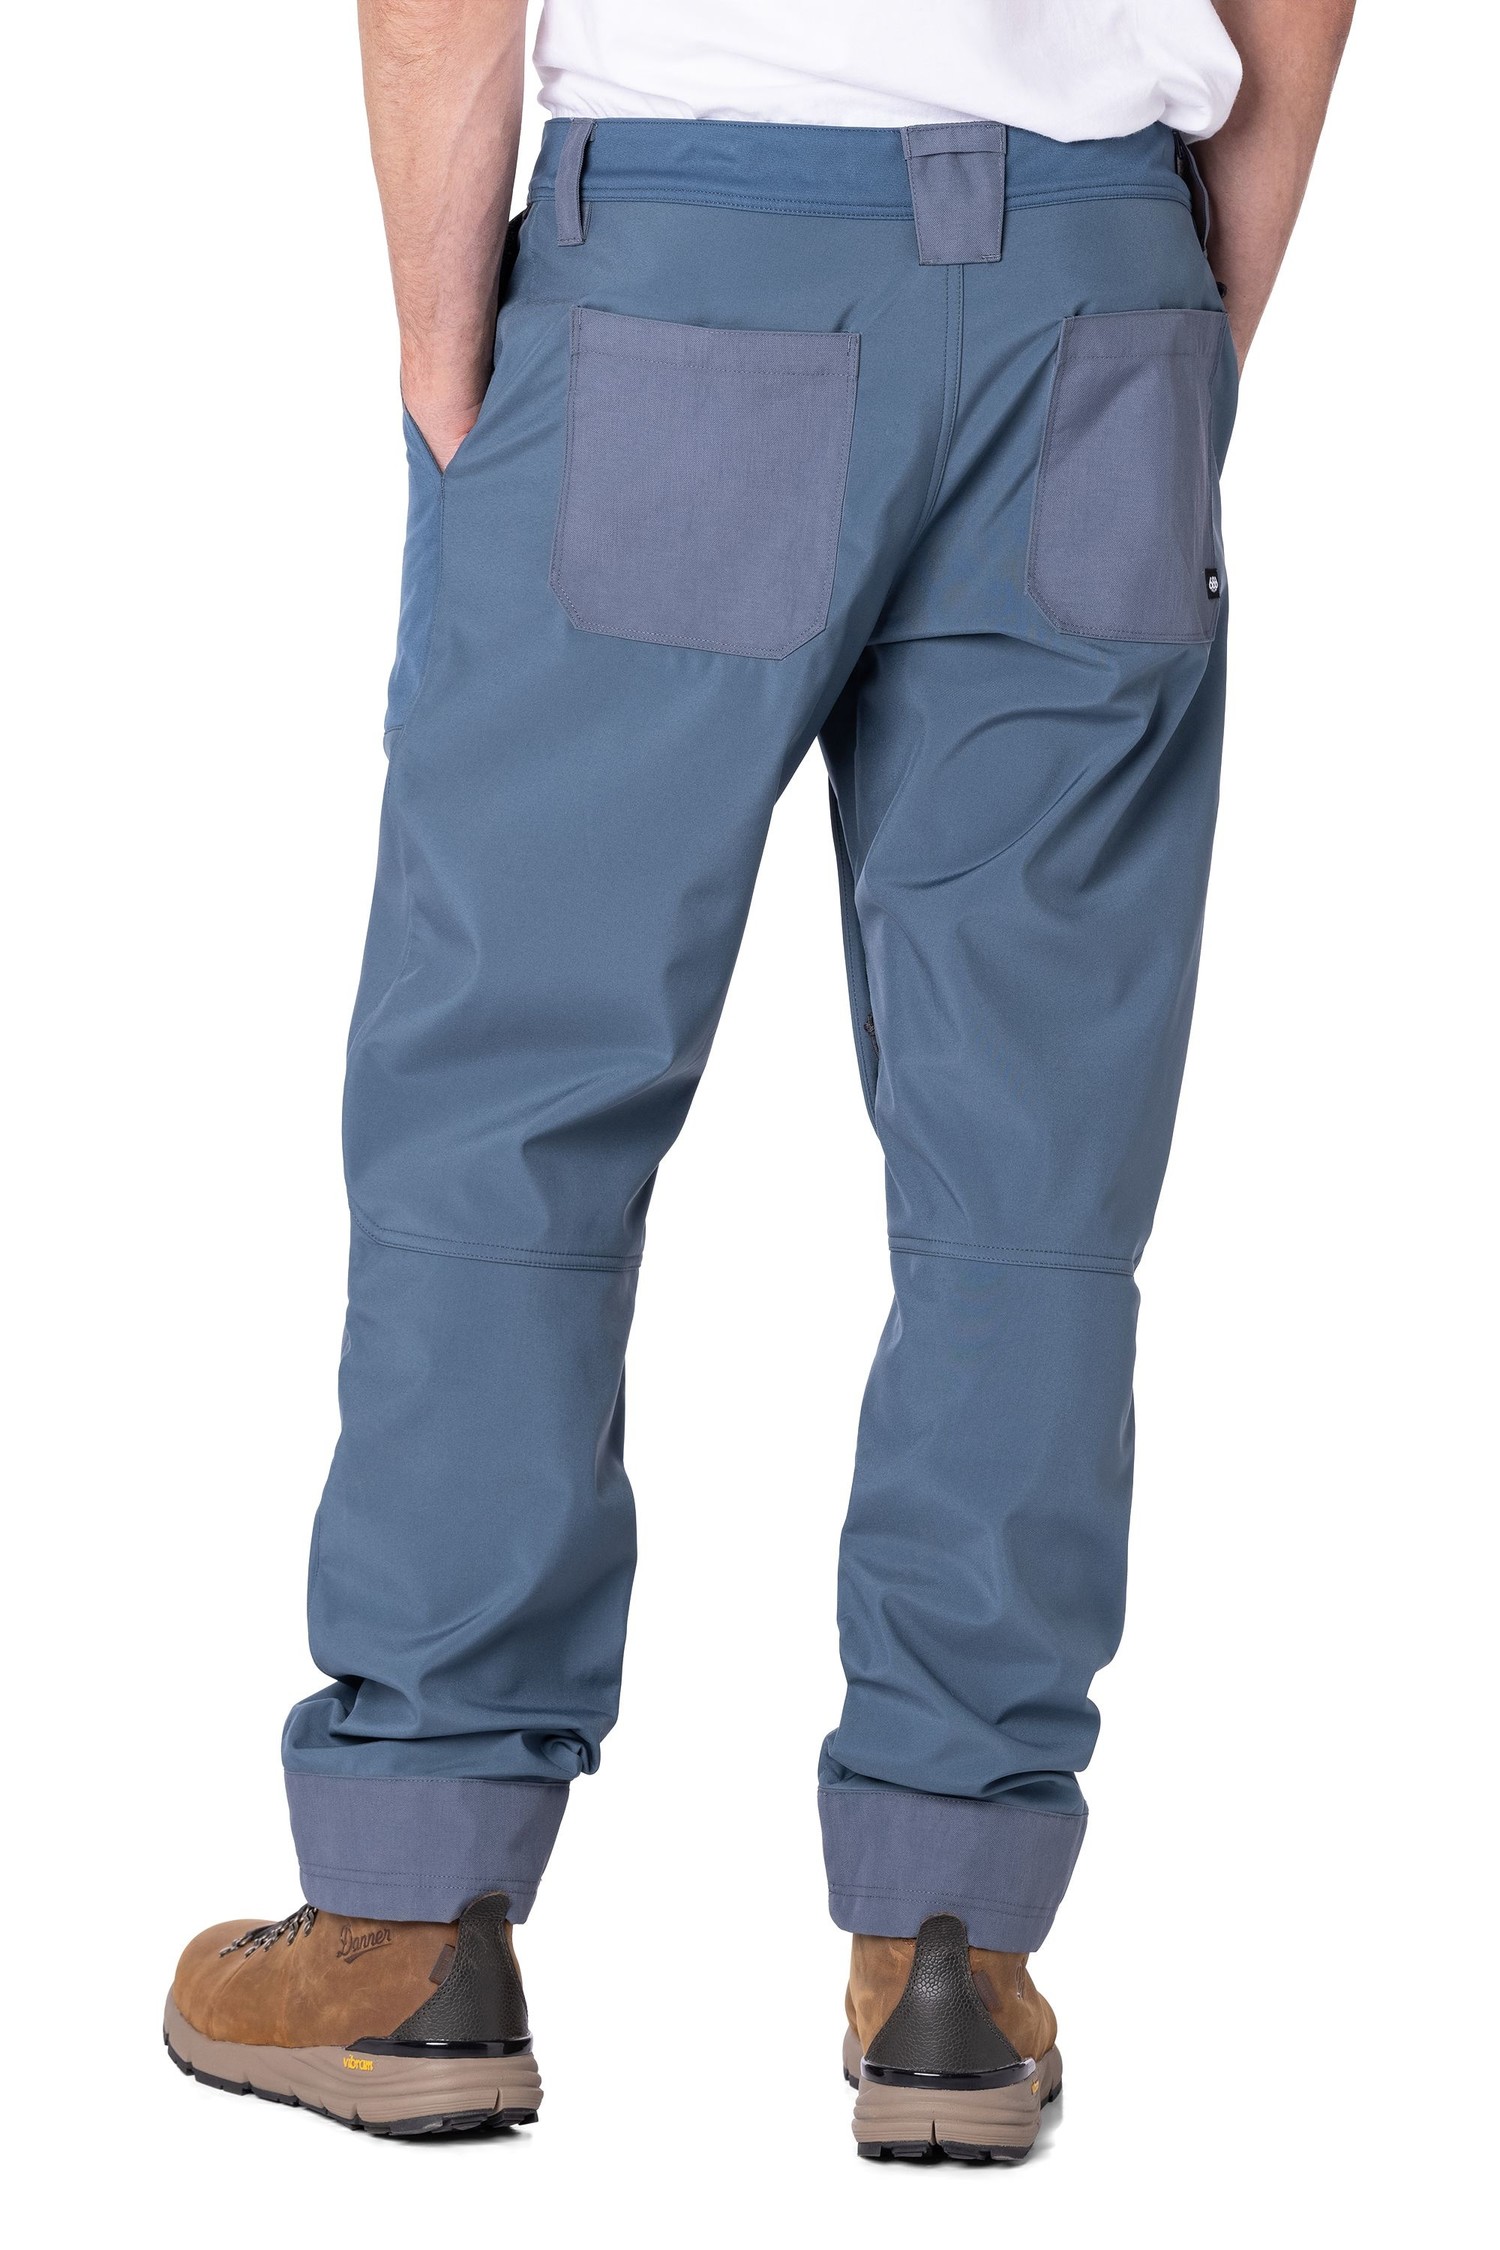 Buy Navy Blue Trousers & Pants for Men by ProEarth Online